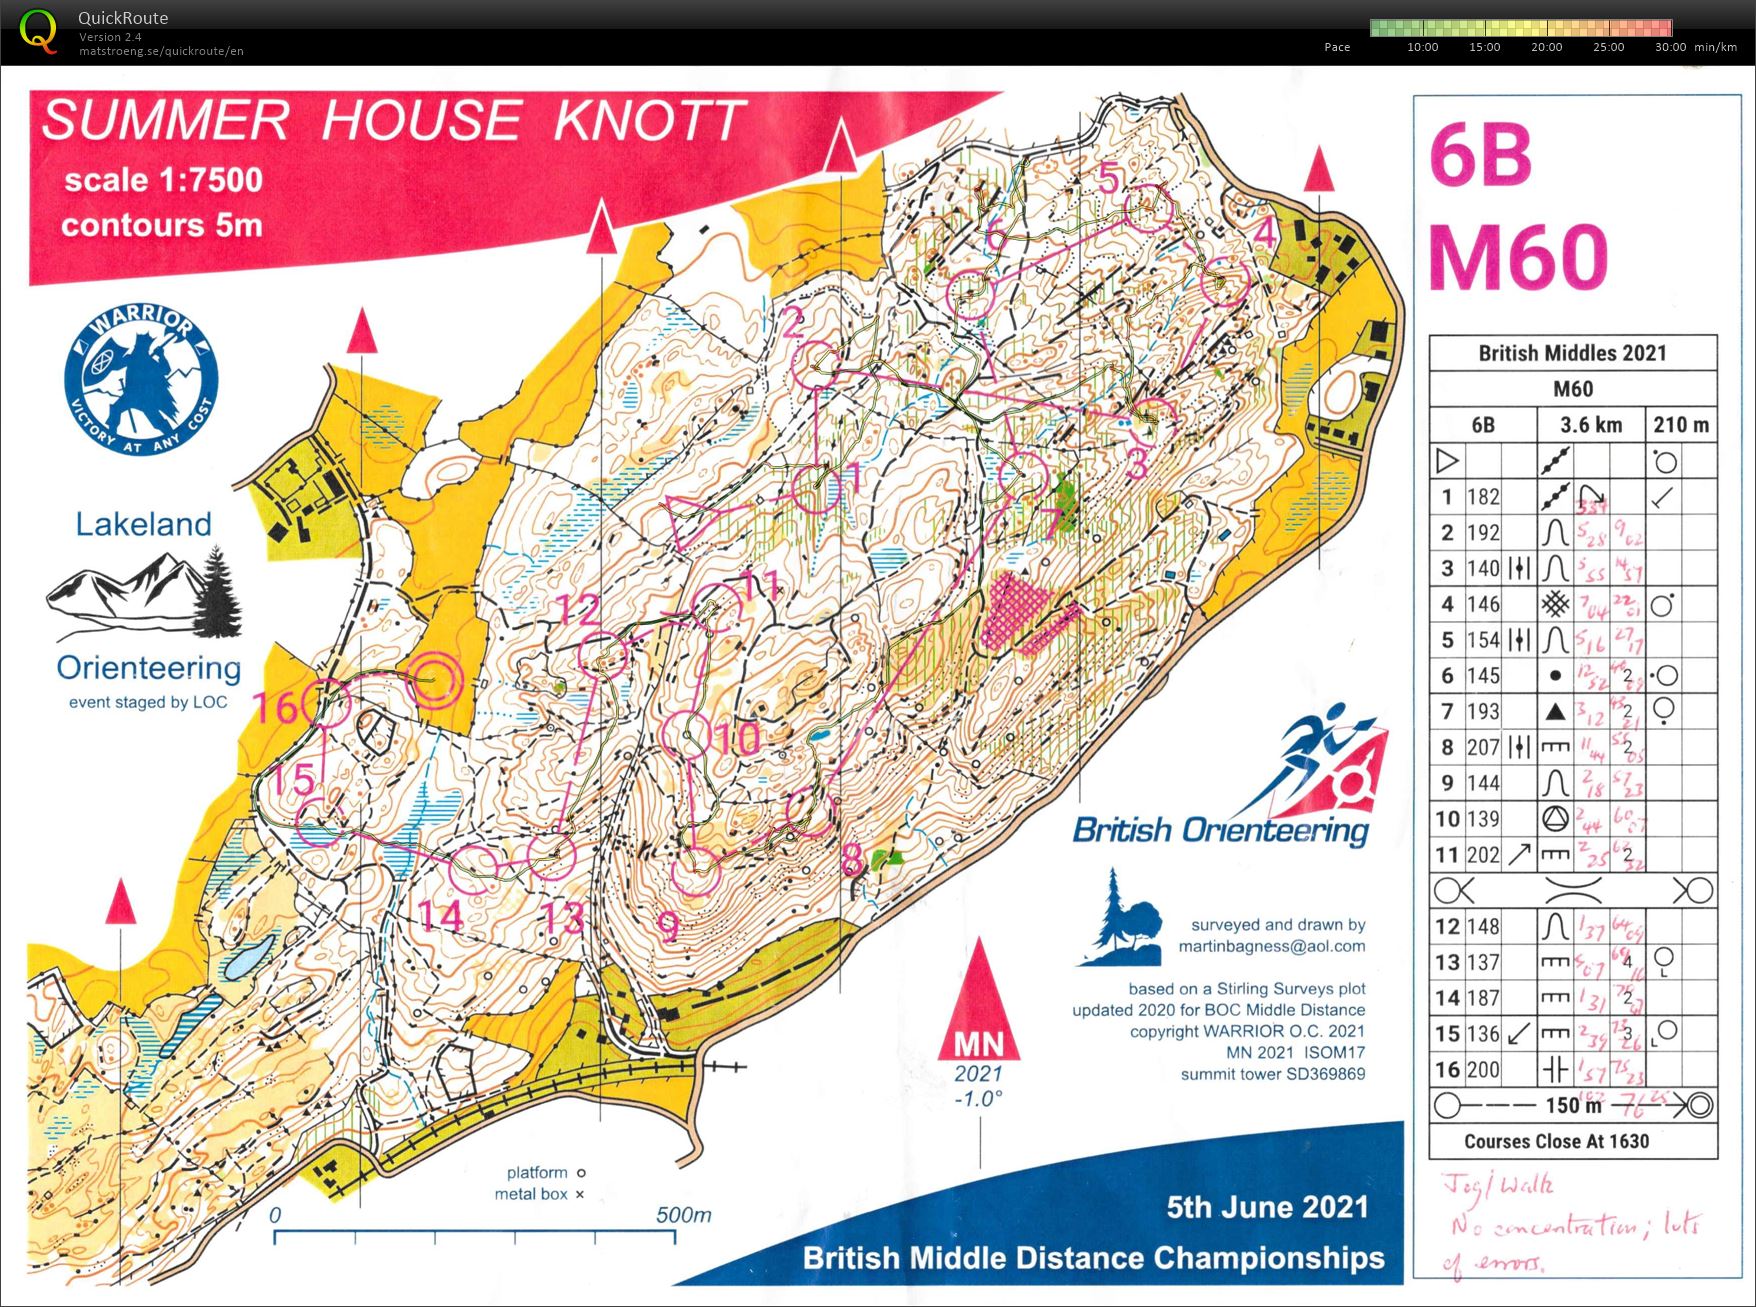 British Middle Distance Championships H60 (05.06.2021)